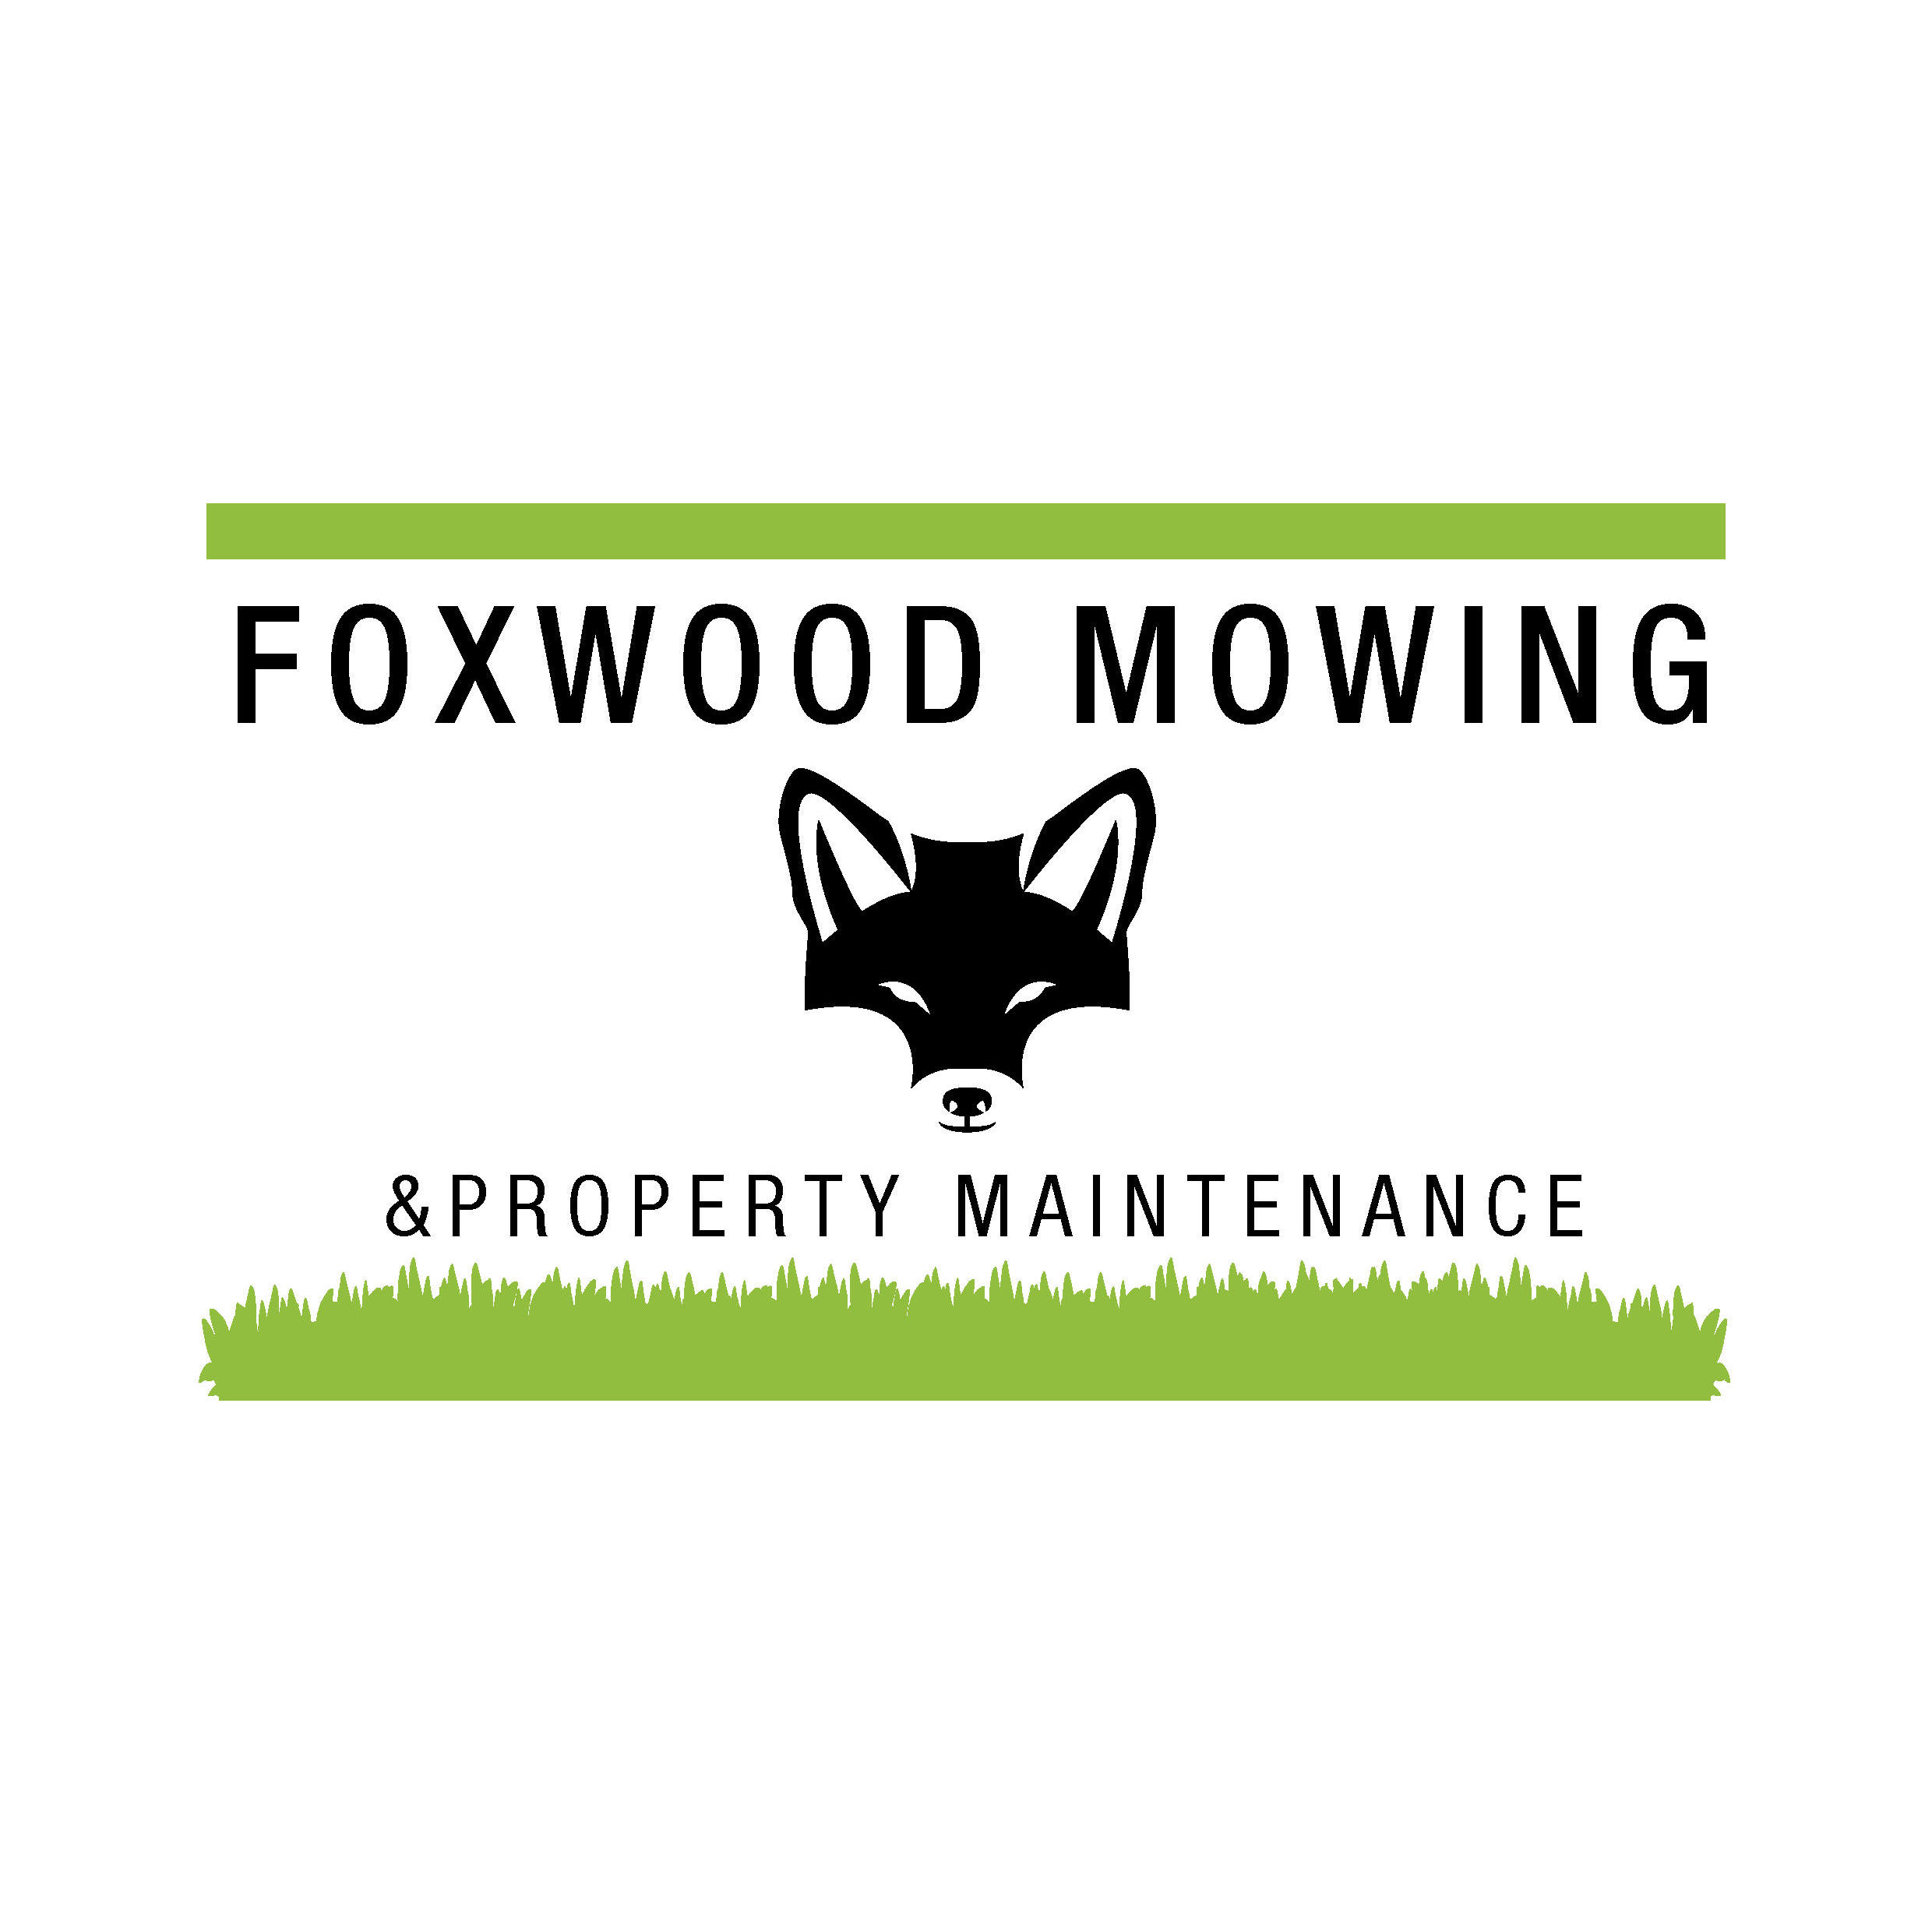 Foxwood Mowing and Property Maintenance - Broughton Vale, NSW 2535 - 0438 951 622 | ShowMeLocal.com